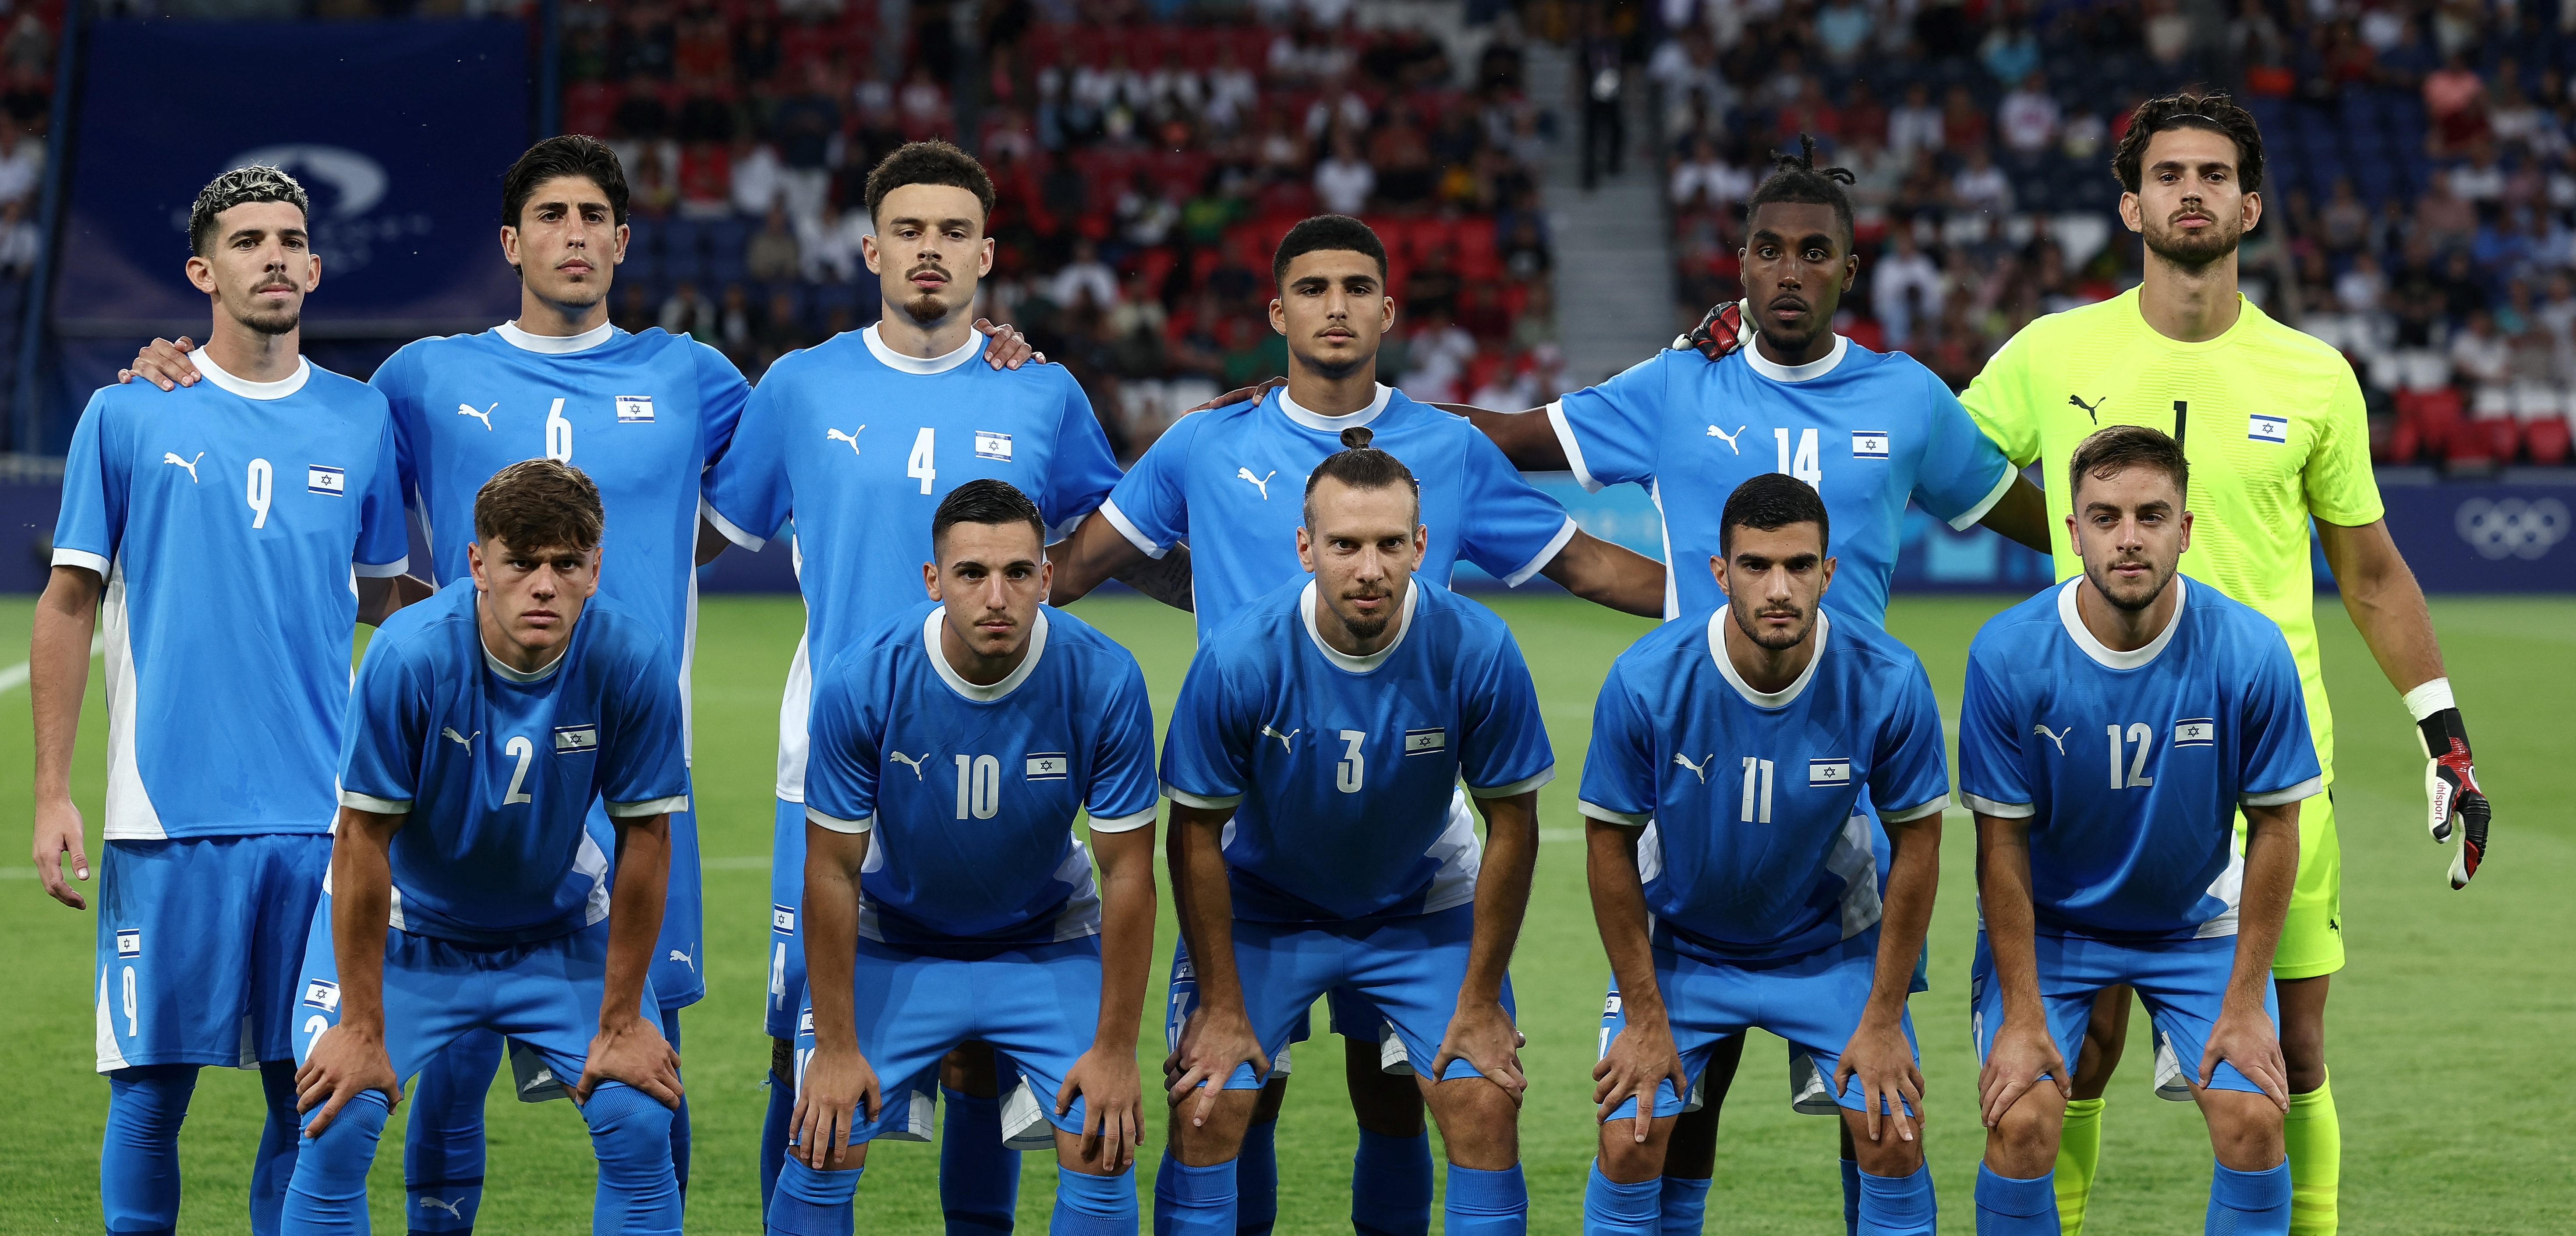 Israel's national anthem loudly jeered before Olympic soccer match vs. Mali